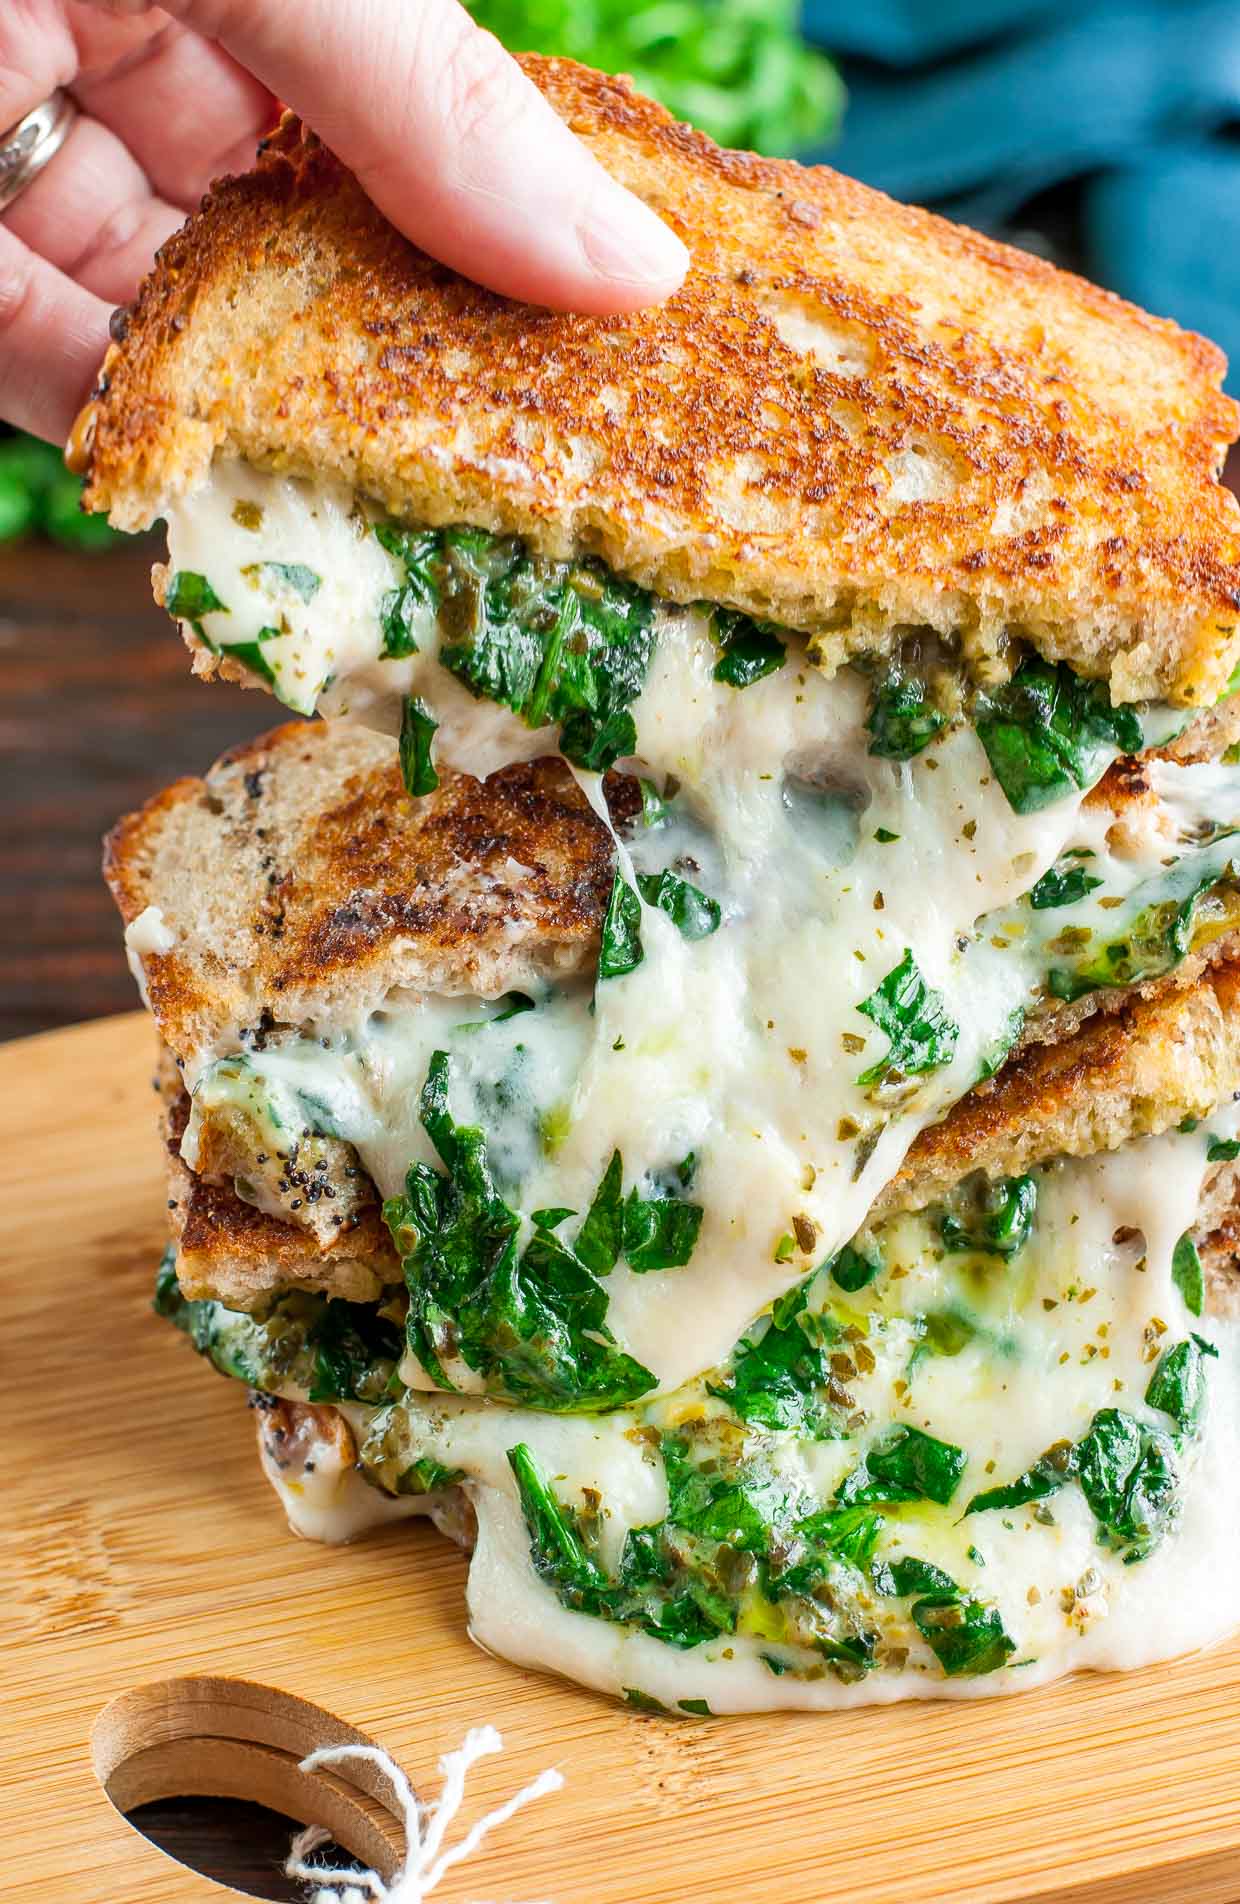 VegNews.JalapenoGrilled Cheese